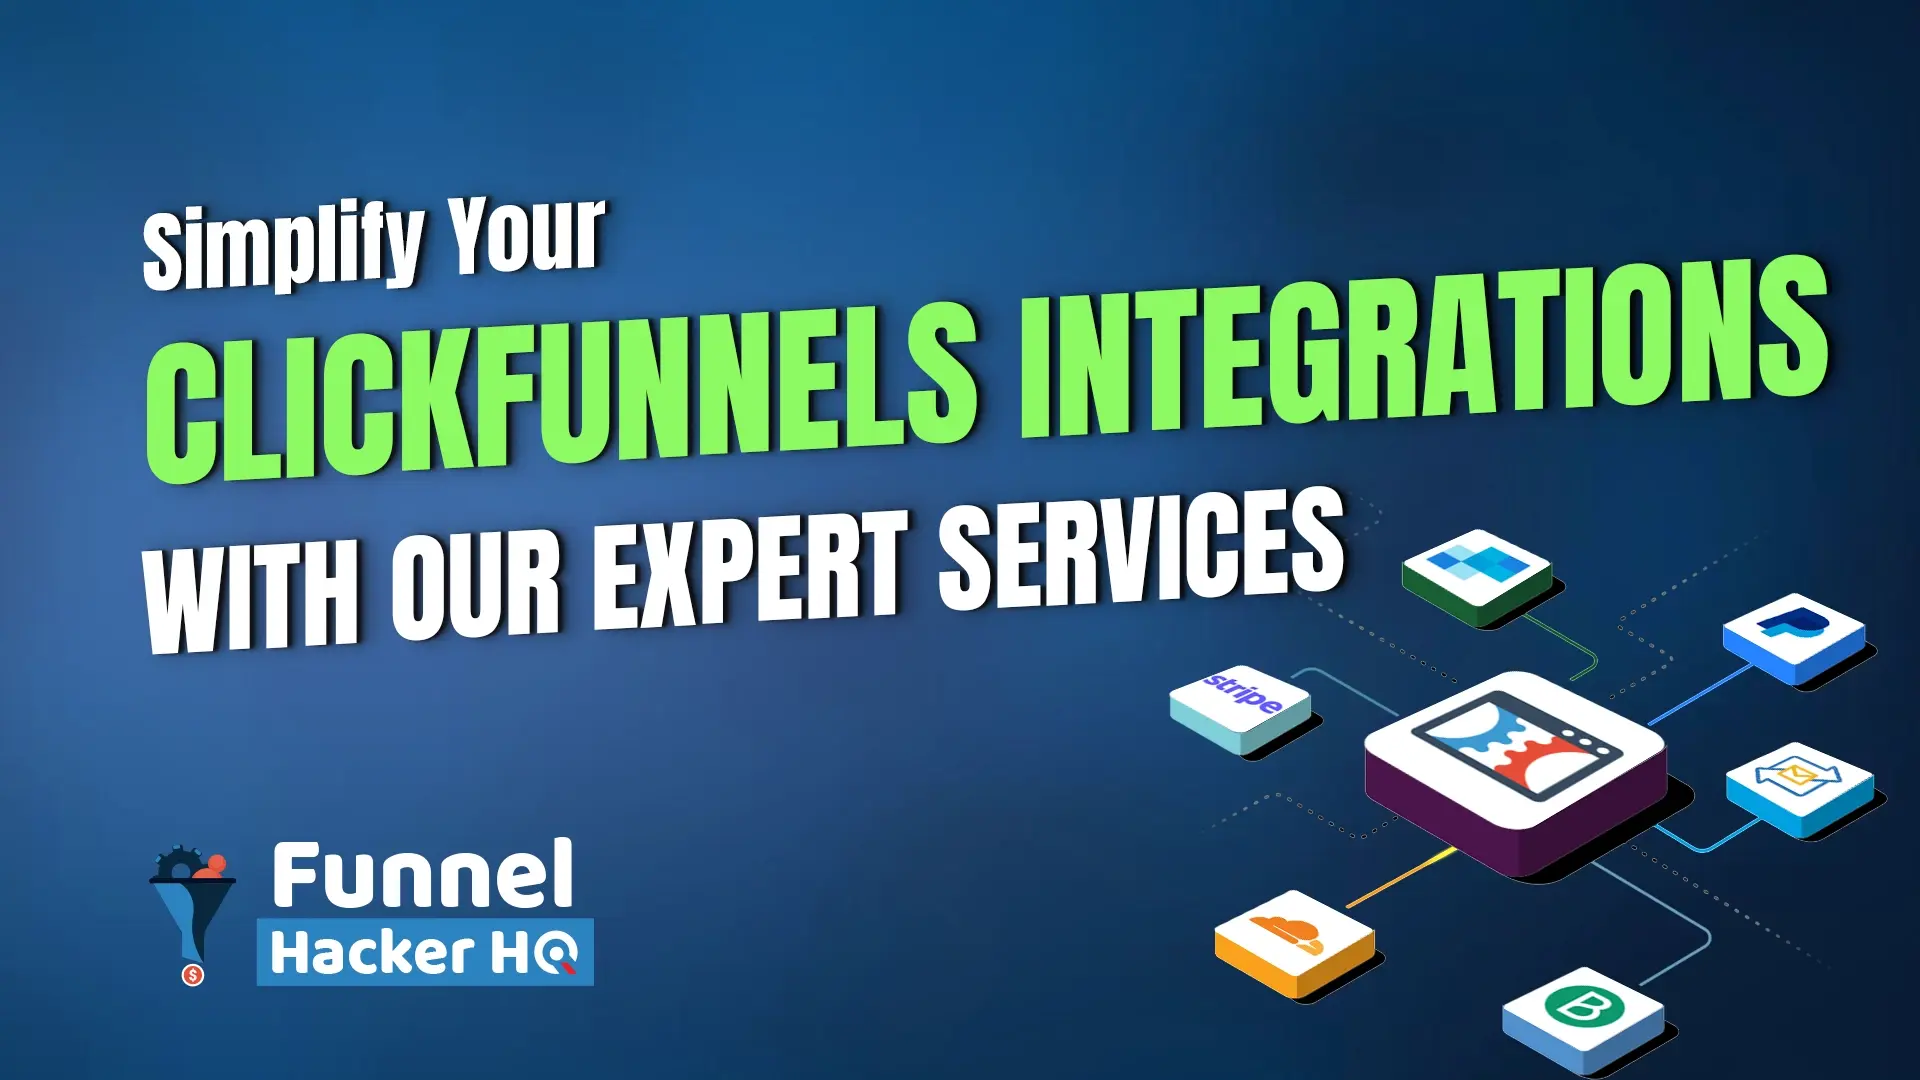 Simplify Your ClickFunnels Integrations with Our Expert Services